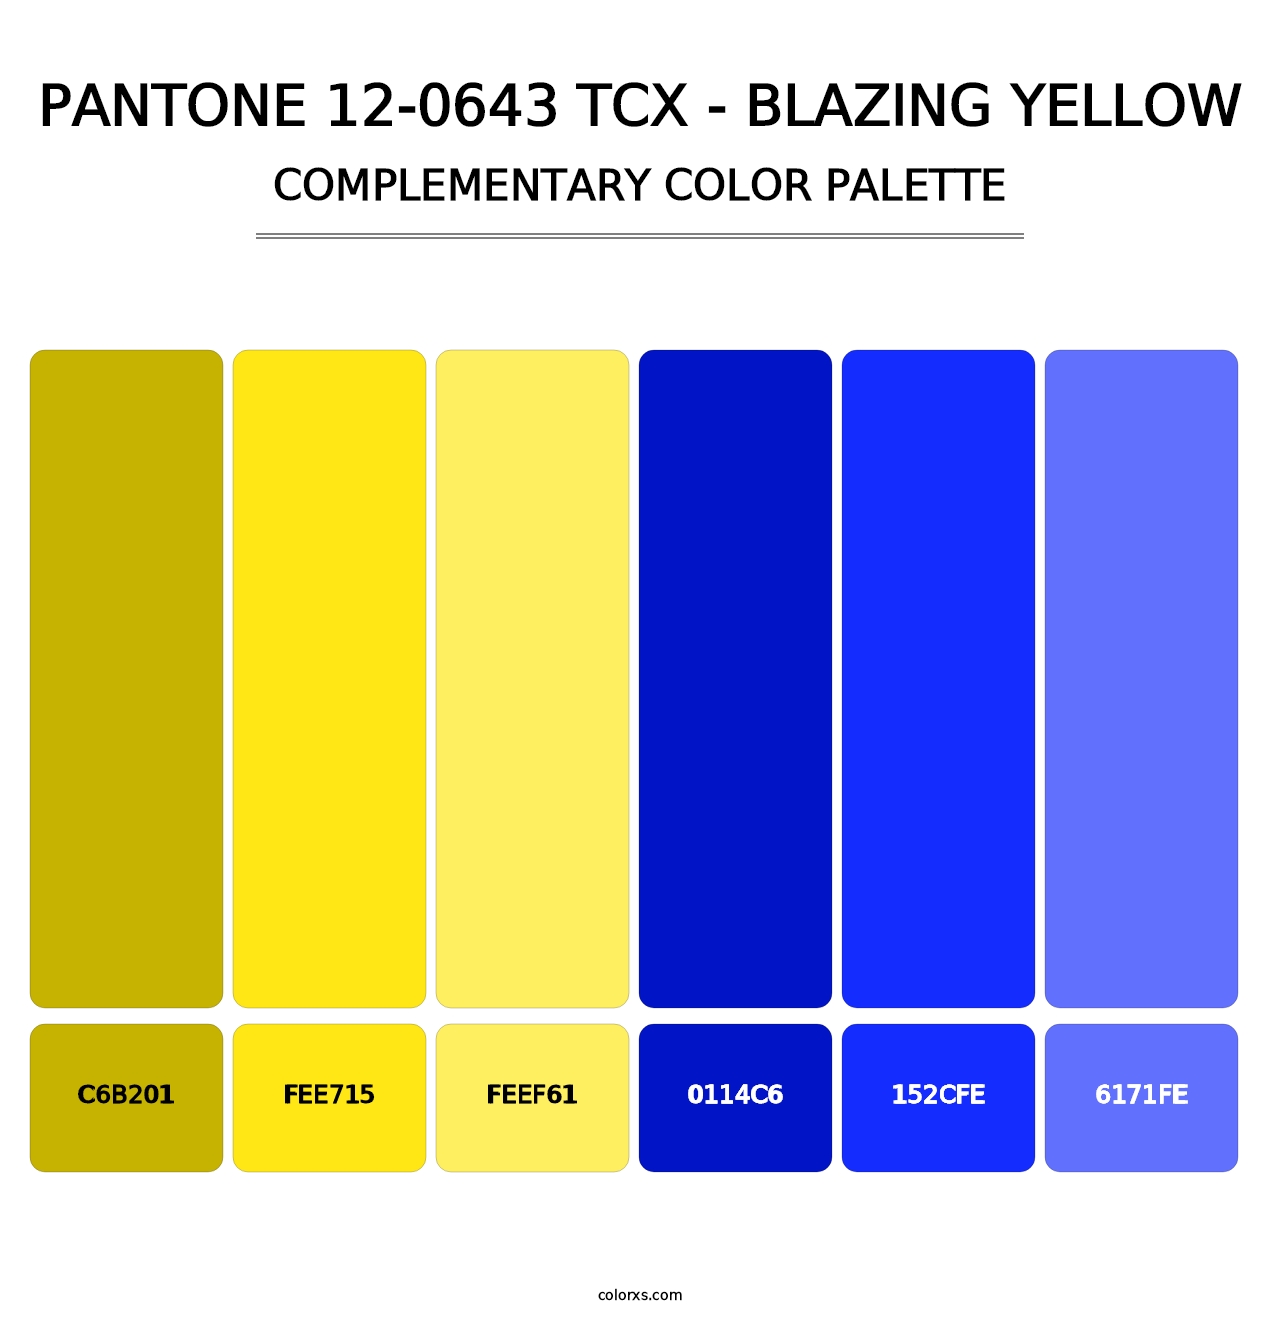 PANTONE 12-0643 TCX - Blazing Yellow - Complementary Color Palette